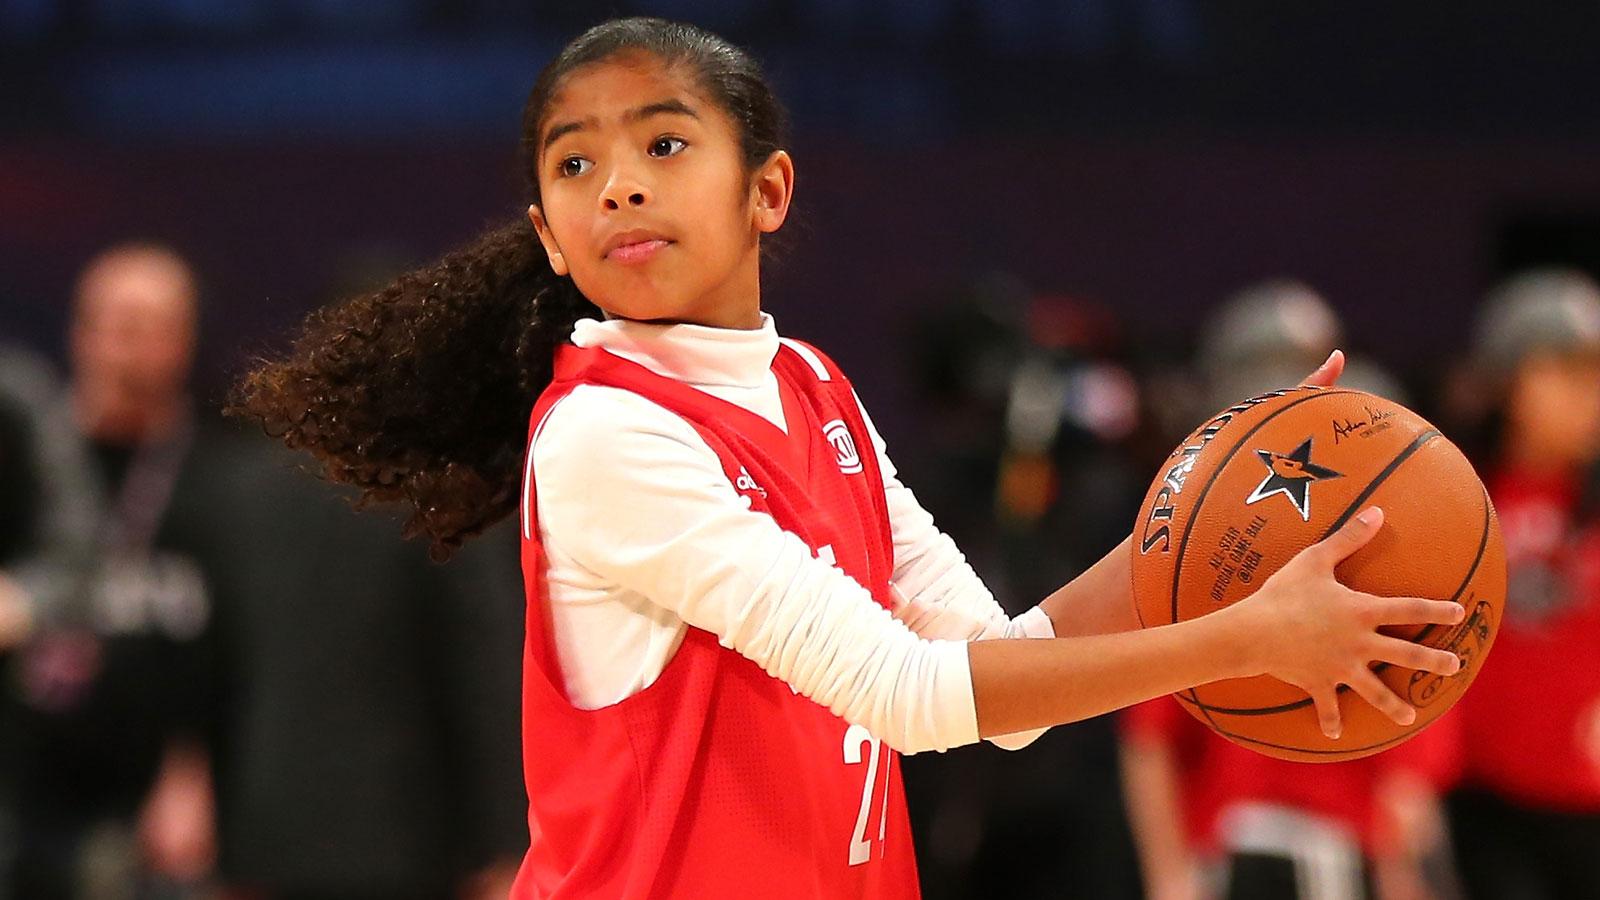 Watch Kobe's 11 Year Old Daughter Hit Her Dad's Signature